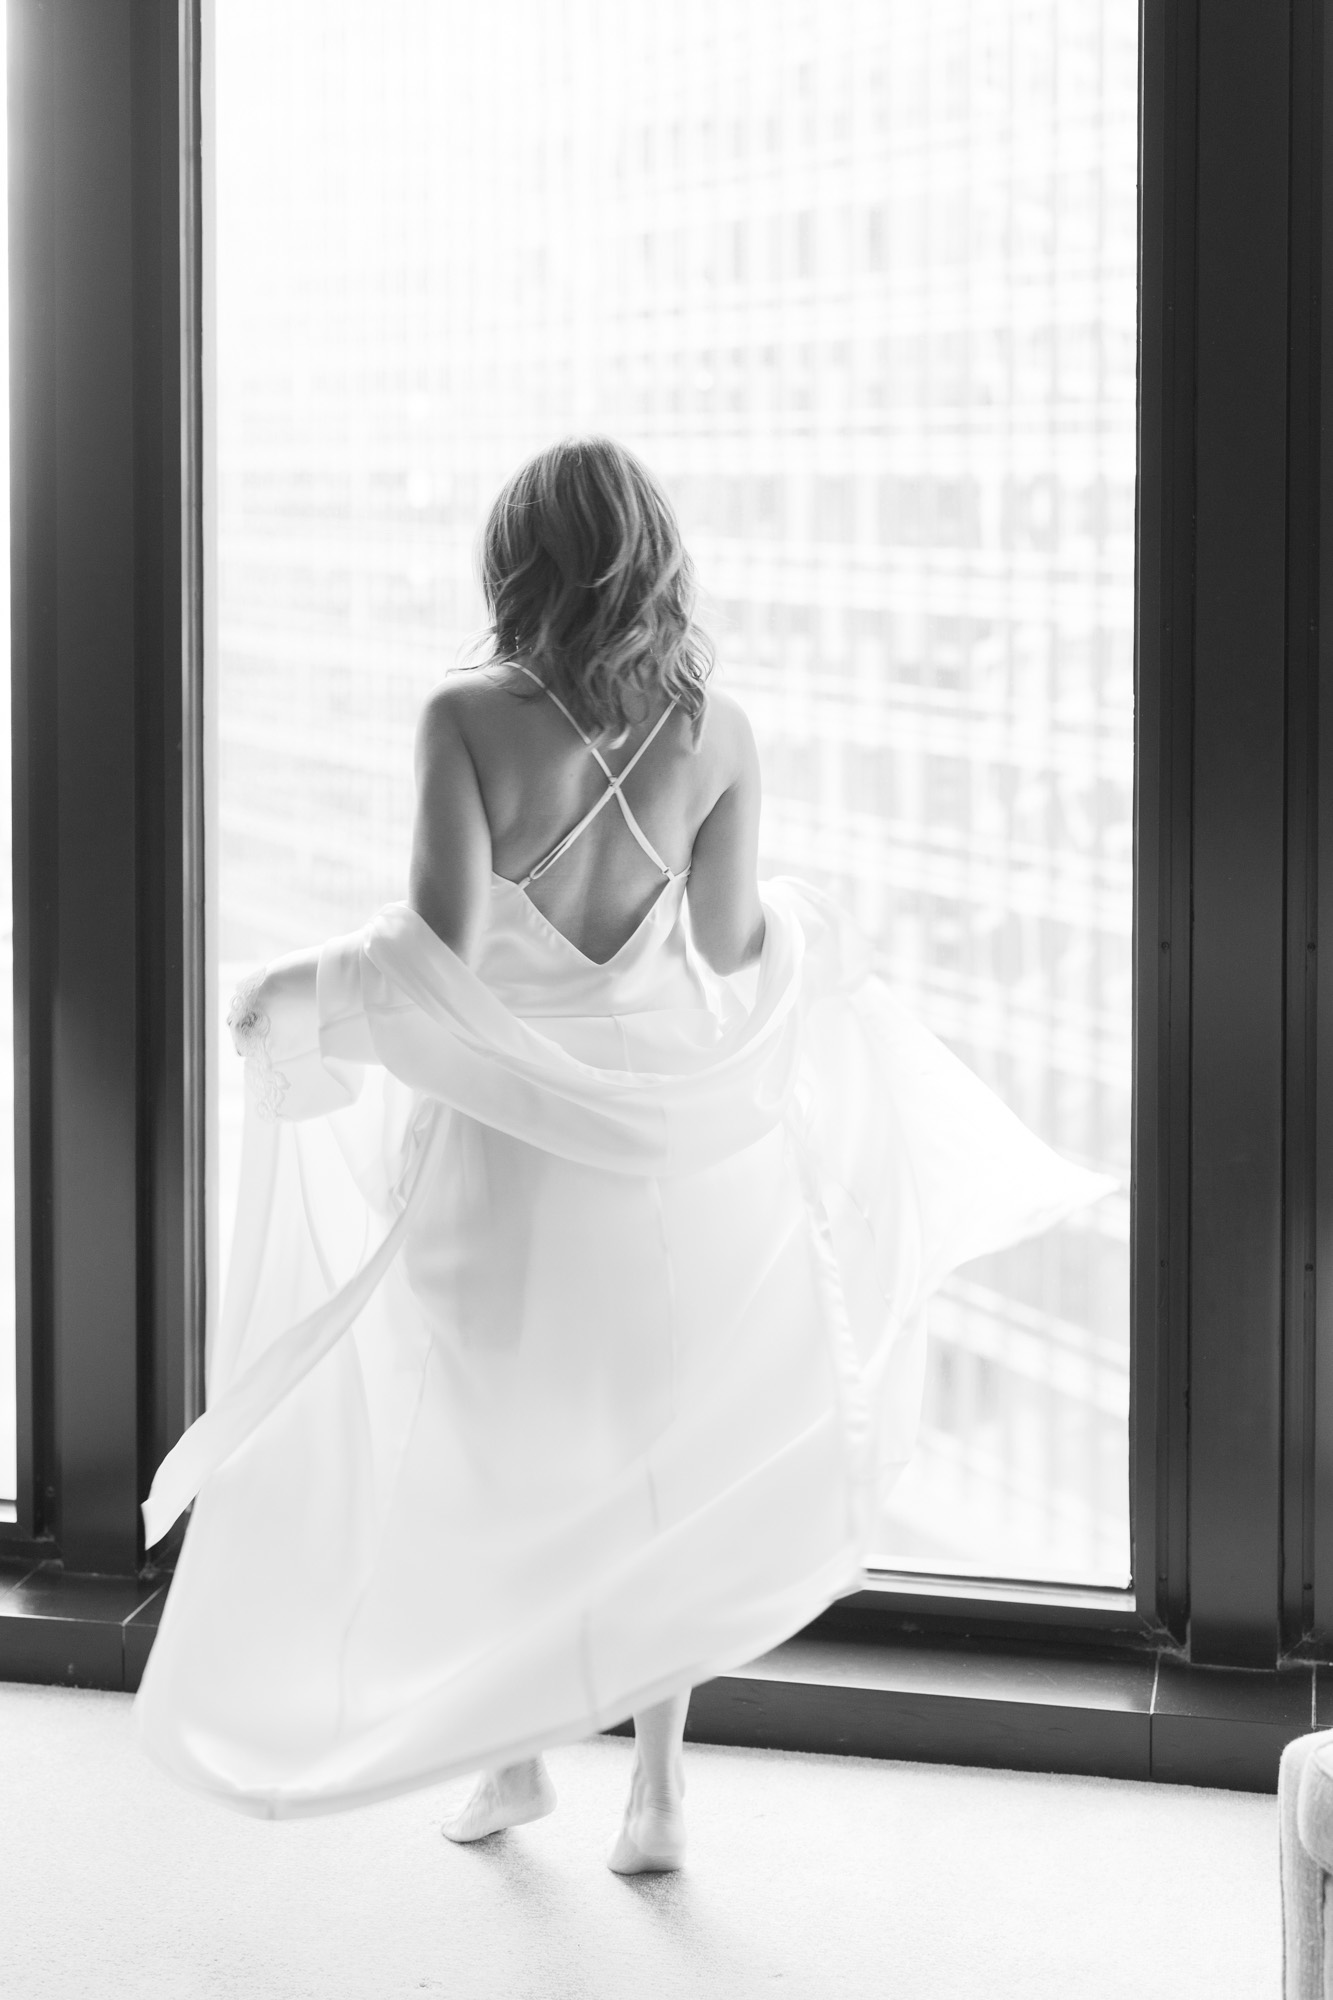 A woman twirls around in her luxurious robe for a boudoir photo.